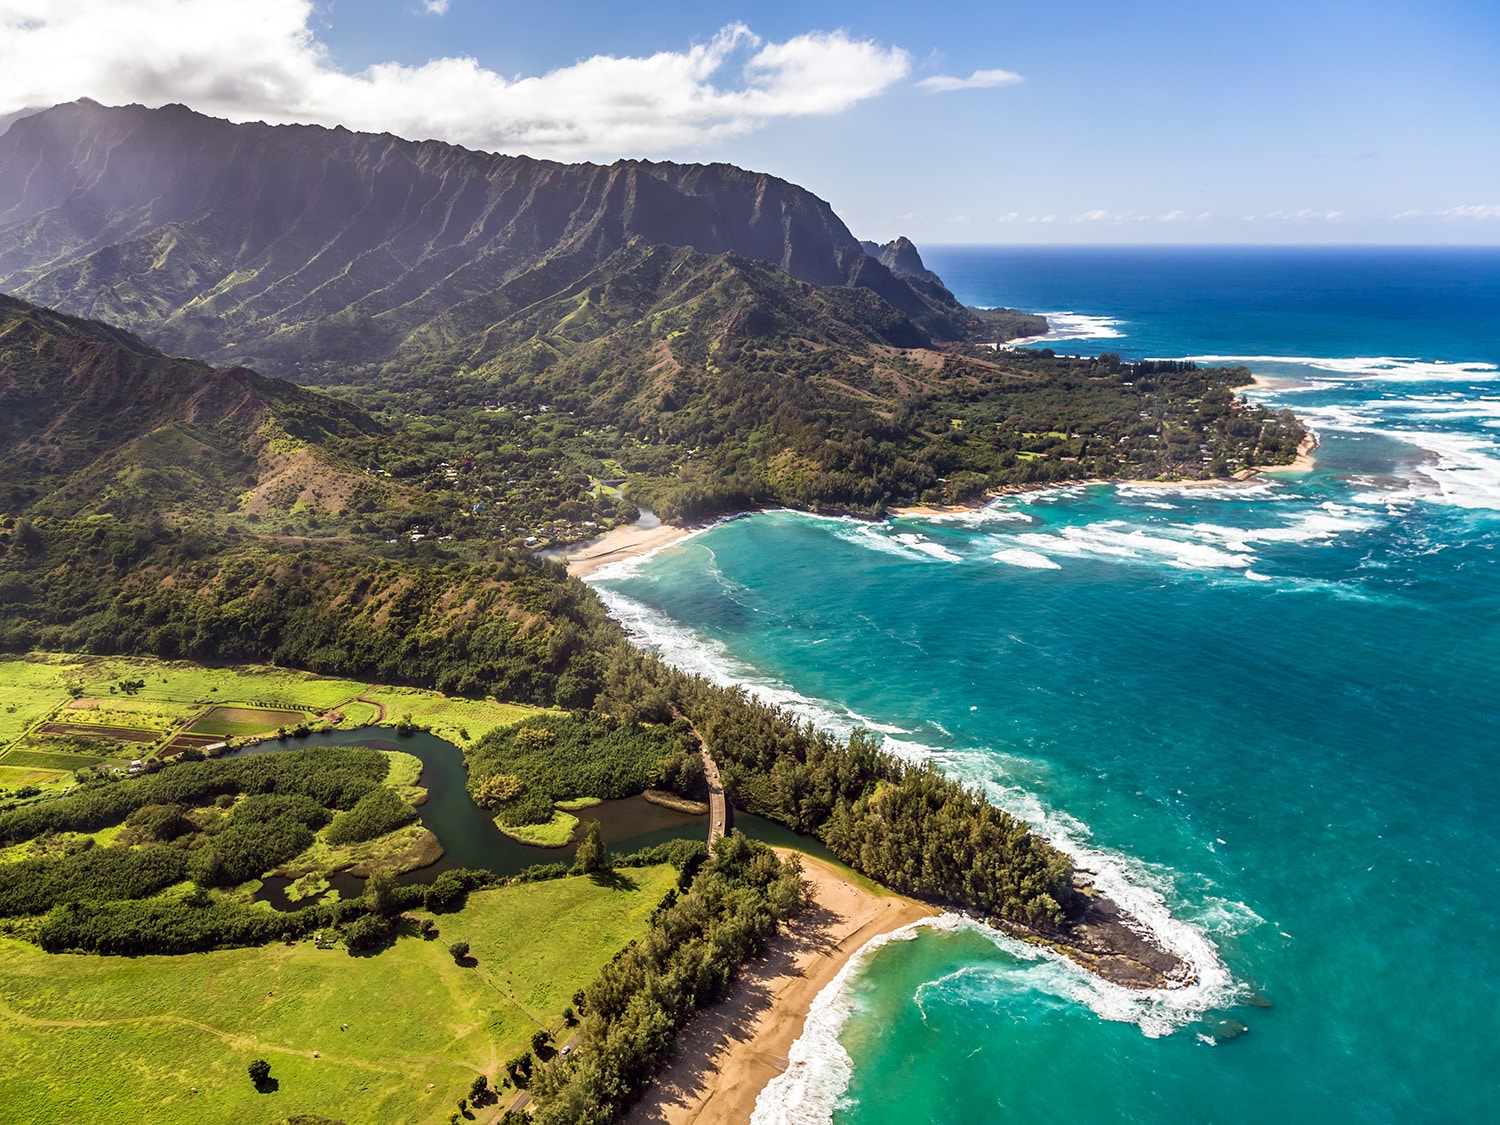 Best things to do in Kauai, Hawaii - Helicopter tour of the Napali Coast